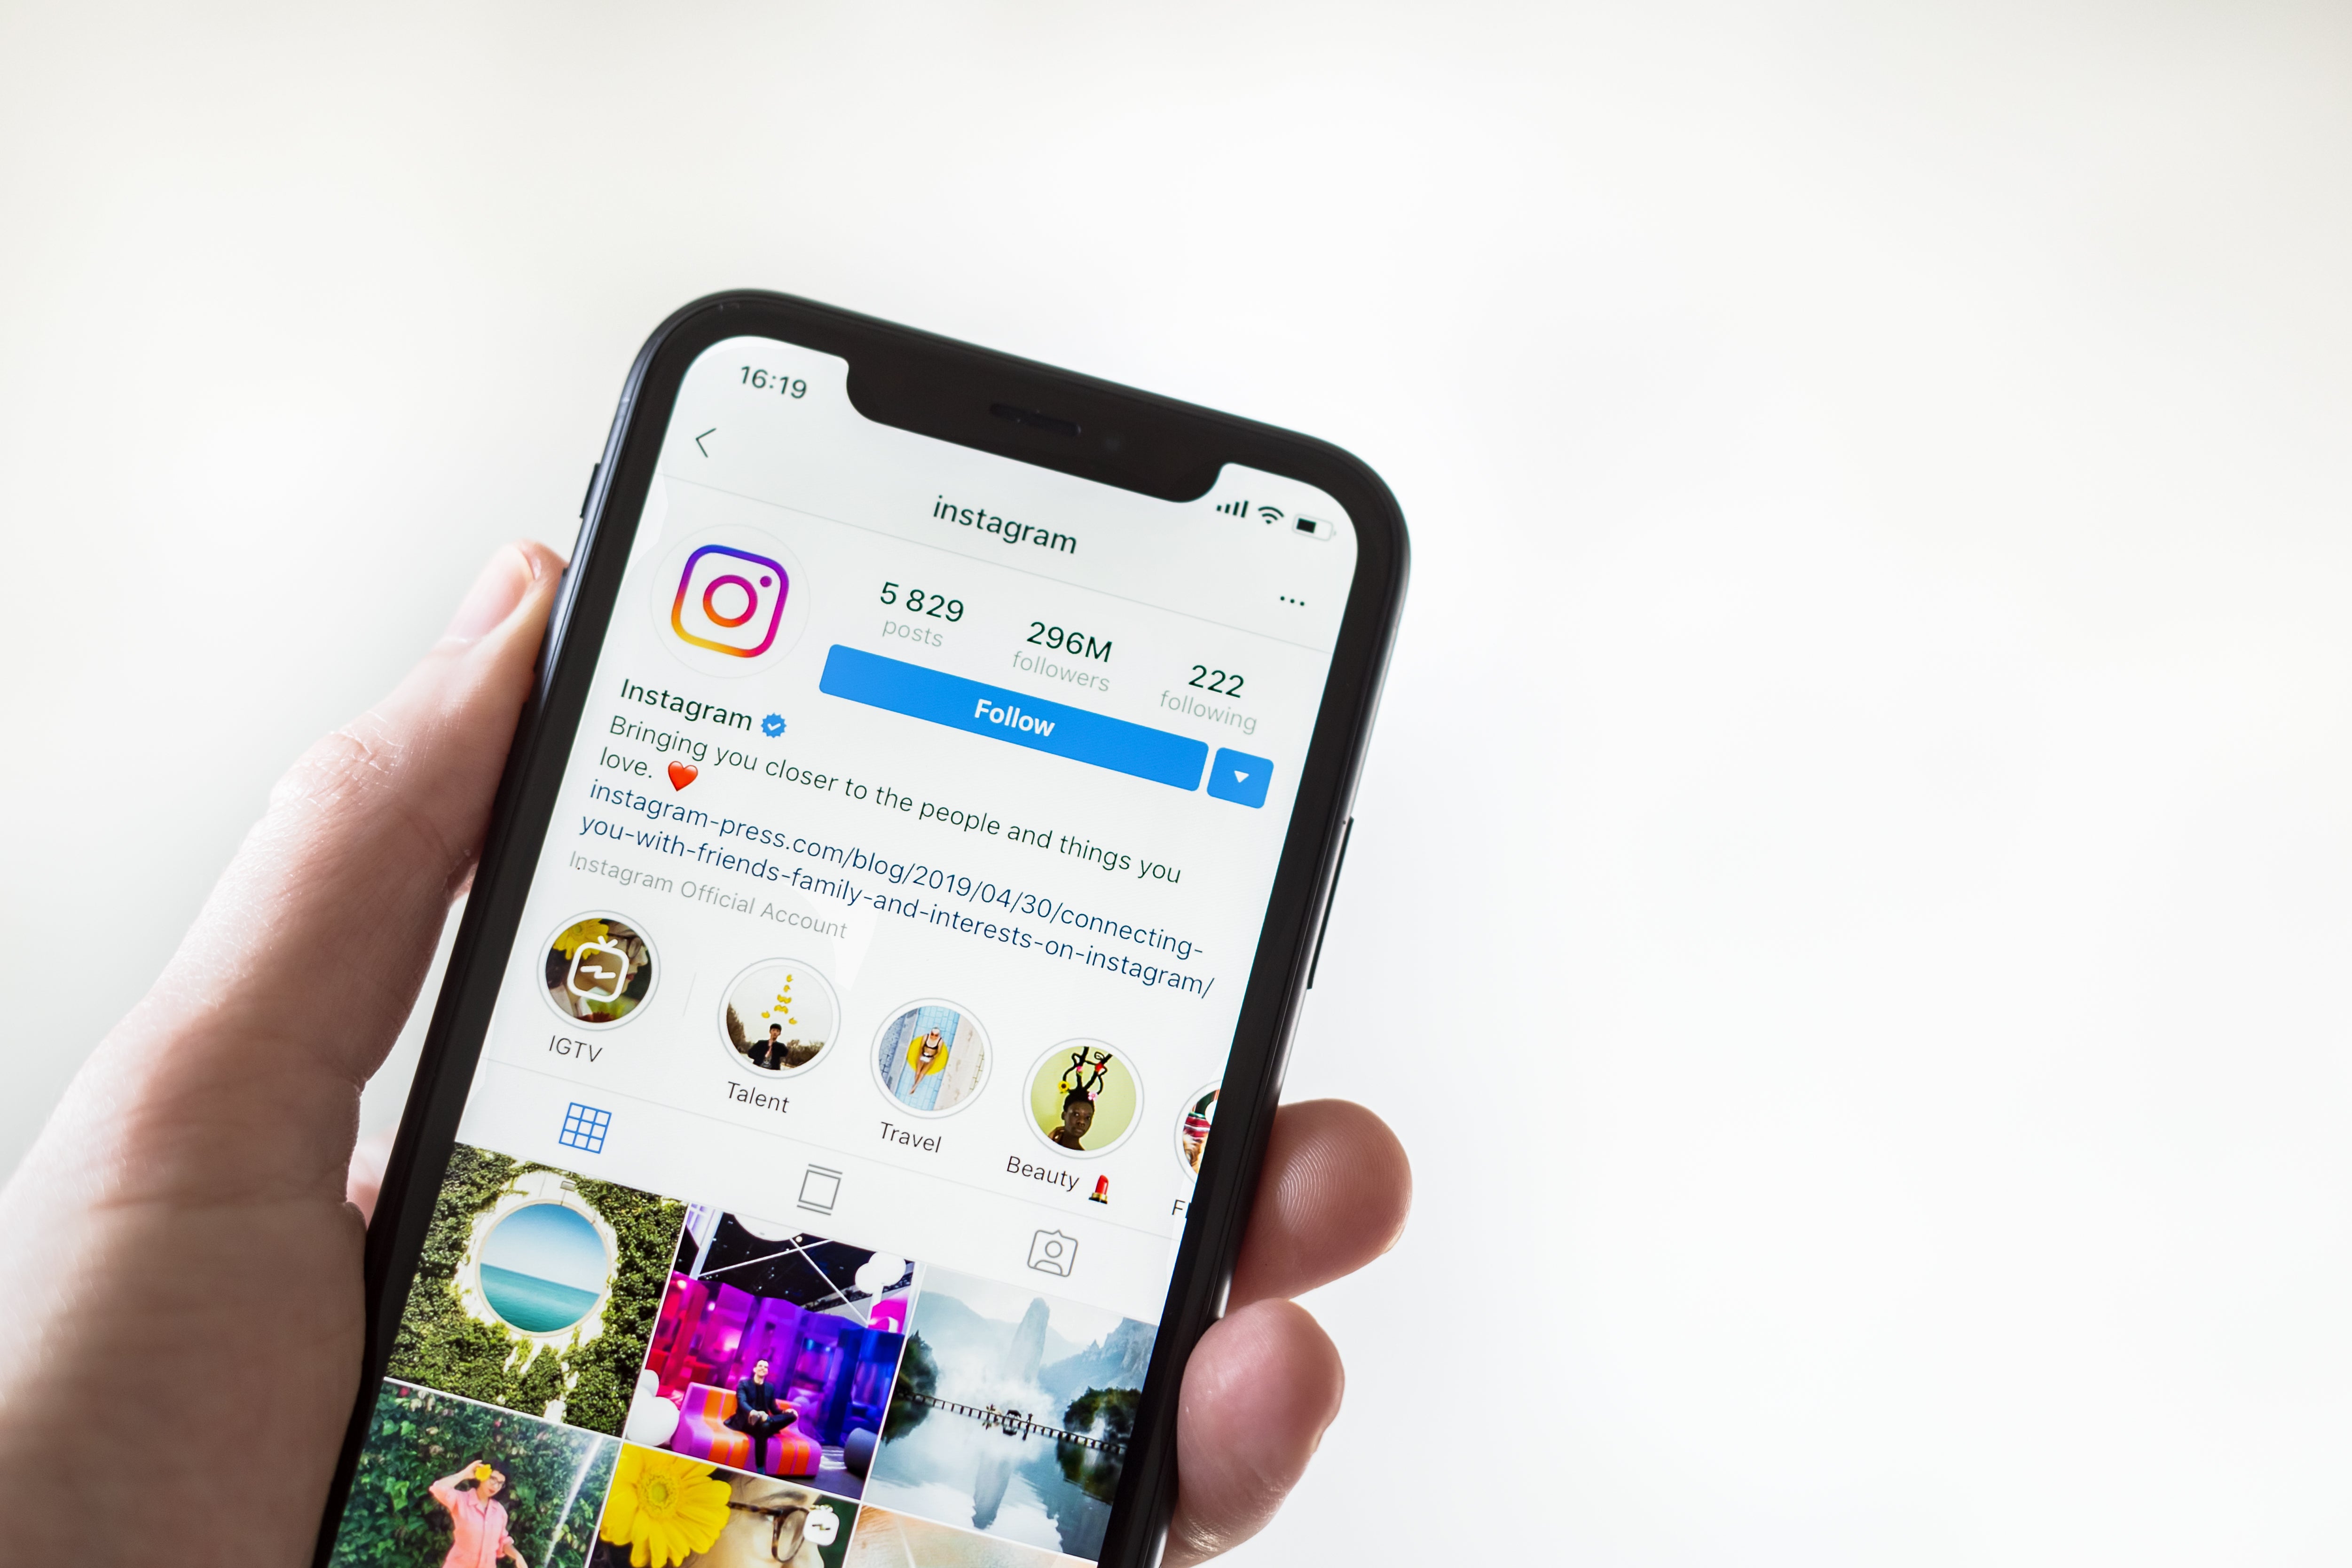 How to see who has ignored your follow requests on Instagram